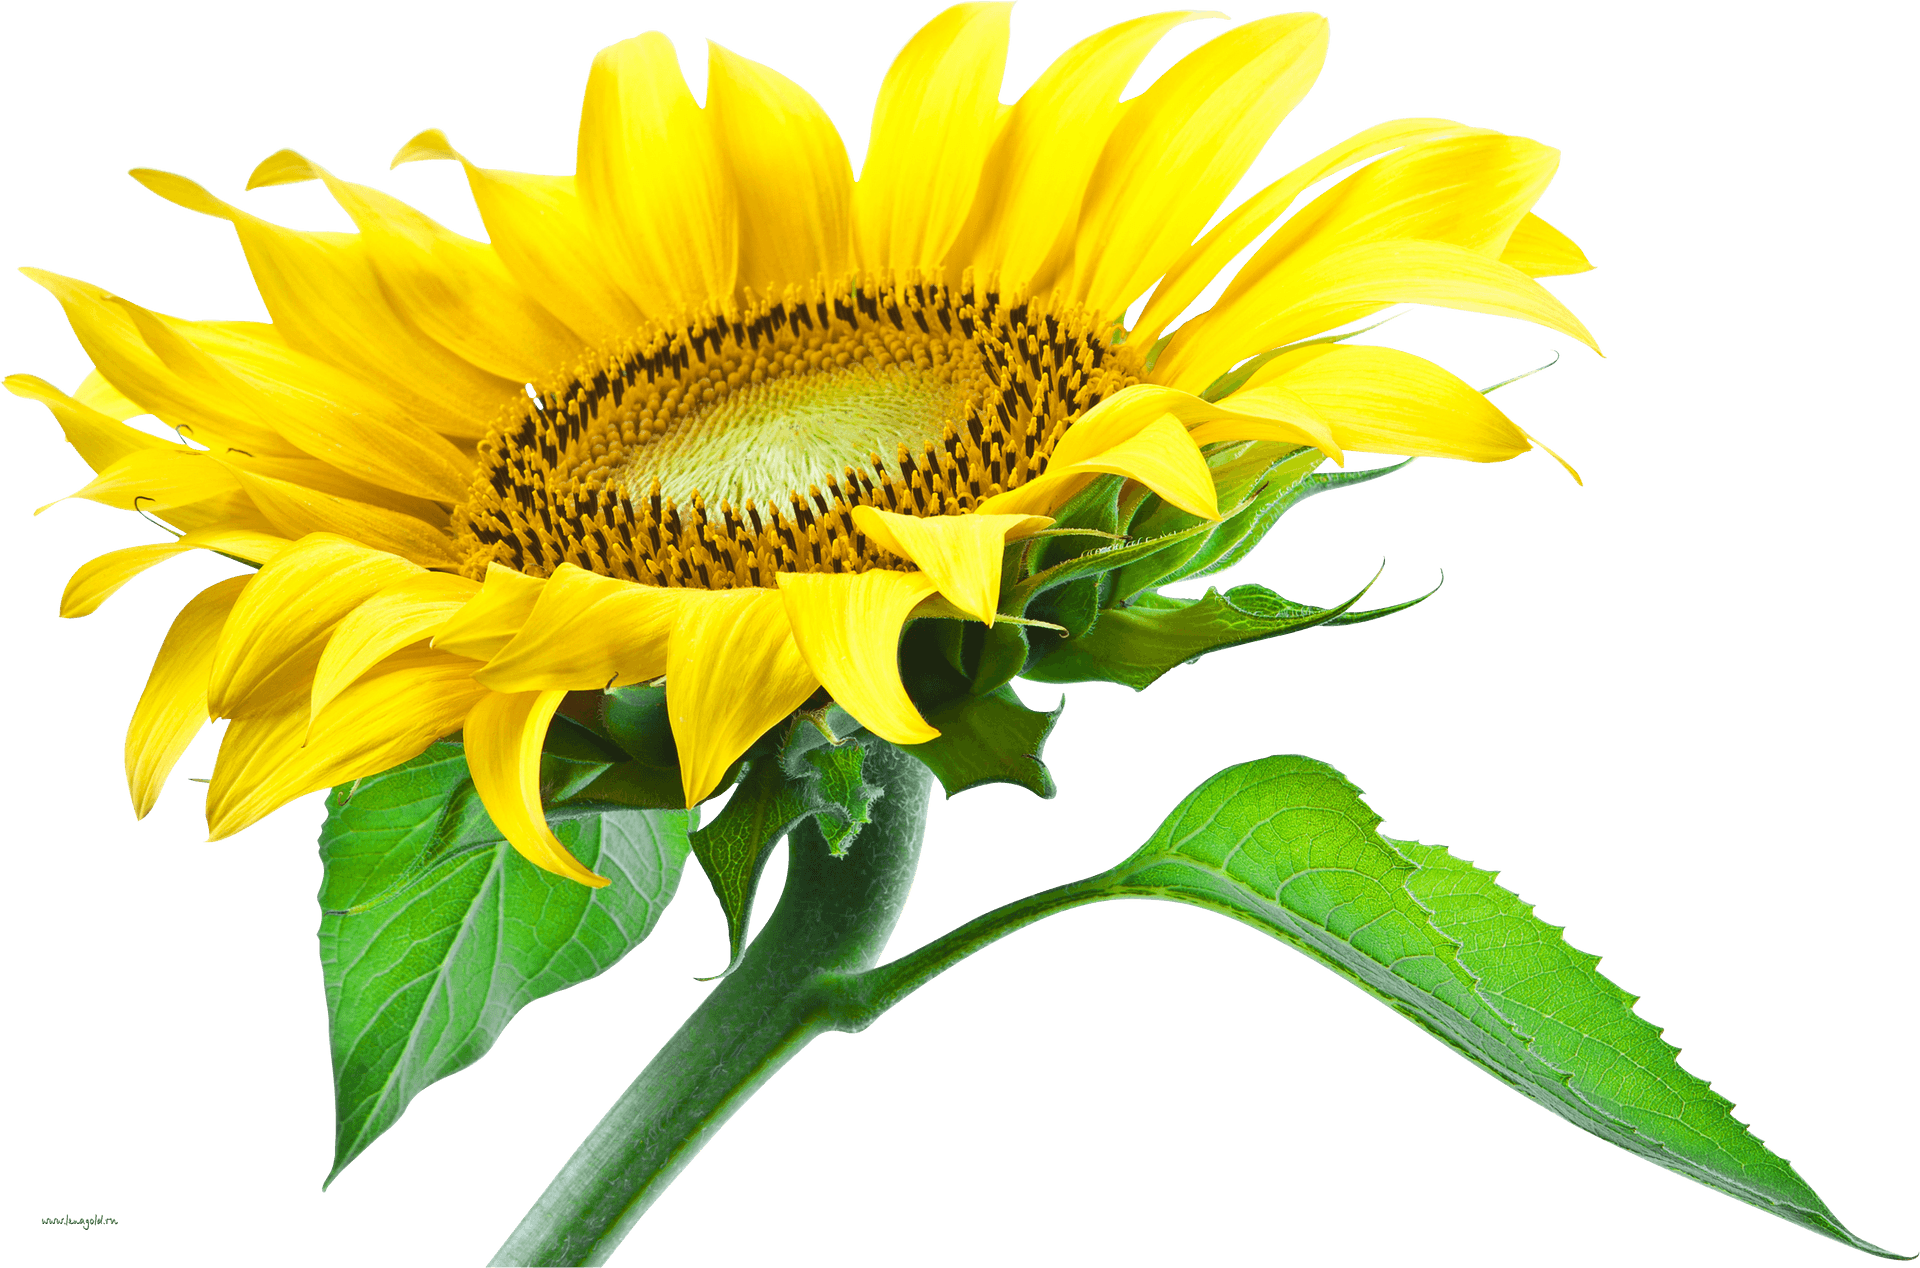 Vibrant Sunflower Isolated.png PNG image